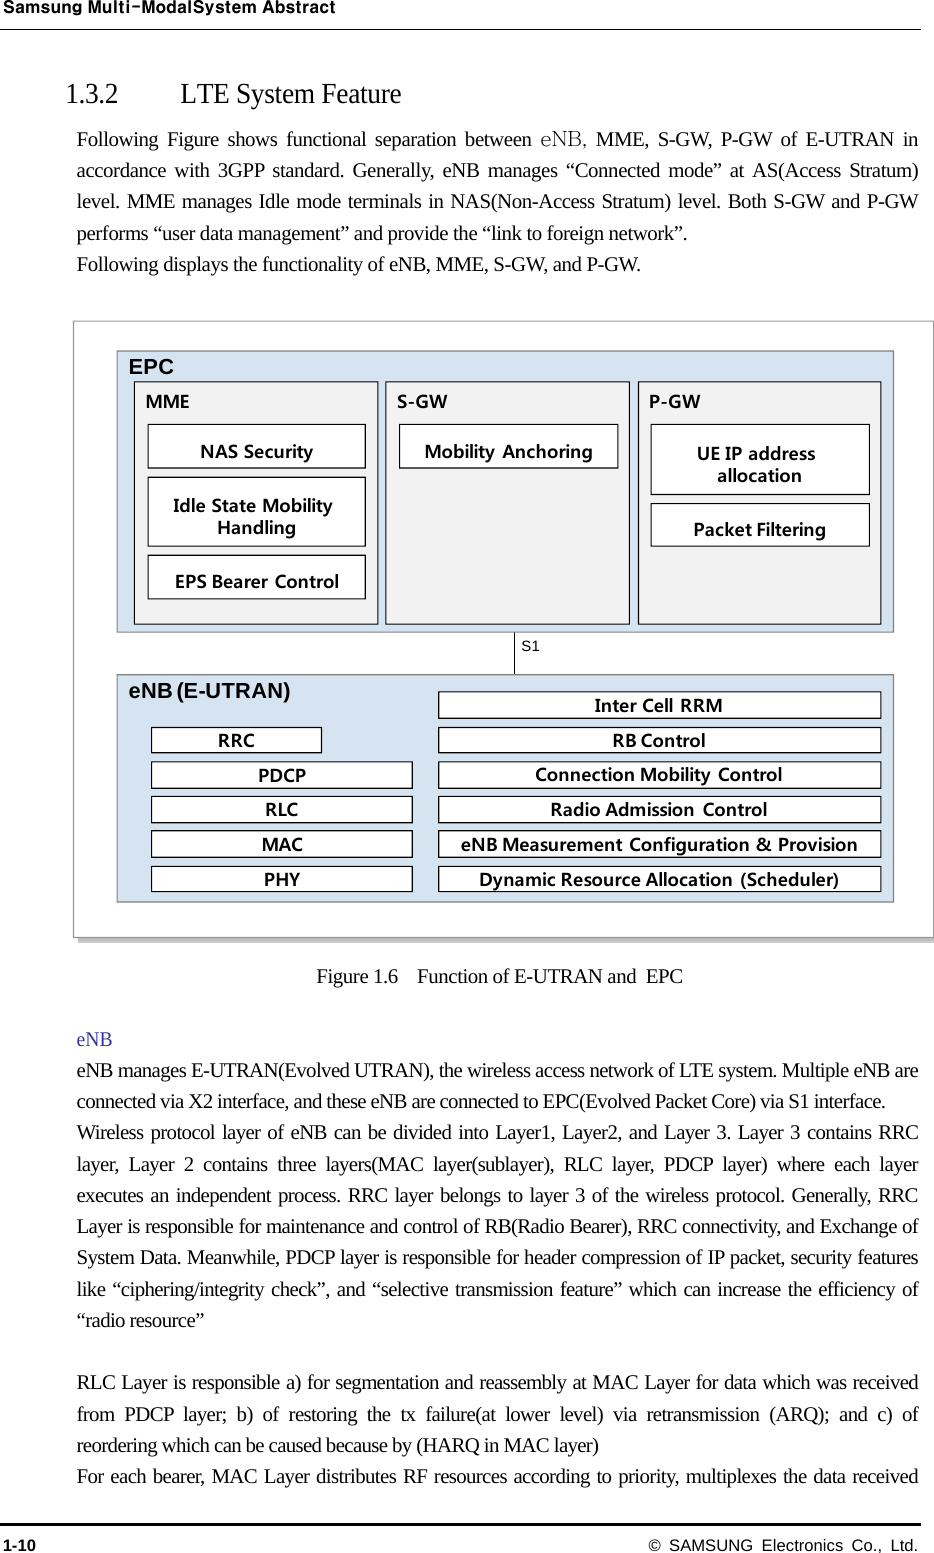 Samsung Multi-ModalSystem Abstract 1-10 © SAMSUNG Electronics Co., Ltd. 1.3.2 LTE System Feature   Following Figure shows functional separation between eNB,  MME, S-GW, P-GW of E-UTRAN in accordance with 3GPP standard. Generally, eNB manages “Connected mode” at AS(Access Stratum) level. MME manages Idle mode terminals in NAS(Non-Access Stratum) level. Both S-GW and P-GW performs “user data management” and provide the “link to foreign network”. Following displays the functionality of eNB, MME, S-GW, and P-GW.    Figure 1.6    Function of E-UTRAN and  EPC  eNB eNB manages E-UTRAN(Evolved UTRAN), the wireless access network of LTE system. Multiple eNB are connected via X2 interface, and these eNB are connected to EPC(Evolved Packet Core) via S1 interface.   Wireless protocol layer of eNB can be divided into Layer1, Layer2, and Layer 3. Layer 3 contains RRC layer, Layer 2 contains three layers(MAC layer(sublayer), RLC layer, PDCP layer) where each layer executes an independent process. RRC layer belongs to layer 3 of the wireless protocol. Generally, RRC Layer is responsible for maintenance and control of RB(Radio Bearer), RRC connectivity, and Exchange of System Data. Meanwhile, PDCP layer is responsible for header compression of IP packet, security features like “ciphering/integrity check”, and “selective transmission feature” which can increase the efficiency of “radio resource”  RLC Layer is responsible a) for segmentation and reassembly at MAC Layer for data which was received from PDCP layer; b) of restoring the tx failure(at lower level) via retransmission (ARQ); and c) of reordering which can be caused because by (HARQ in MAC layer) For each bearer, MAC Layer distributes RF resources according to priority, multiplexes the data received S1EPCeNB(E-UTRAN)RRCPDCPRLCMACPHYMMENAS SecurityIdle State Mobility HandlingEPS Bearer ControlS-GWMobility AnchoringP-GWUE IP address allocationPacket FilteringInter Cell RRMRB ControlConnection Mobility ControlRadio Admission ControleNB Measurement Configuration &amp; ProvisionDynamic Resource Allocation (Scheduler)